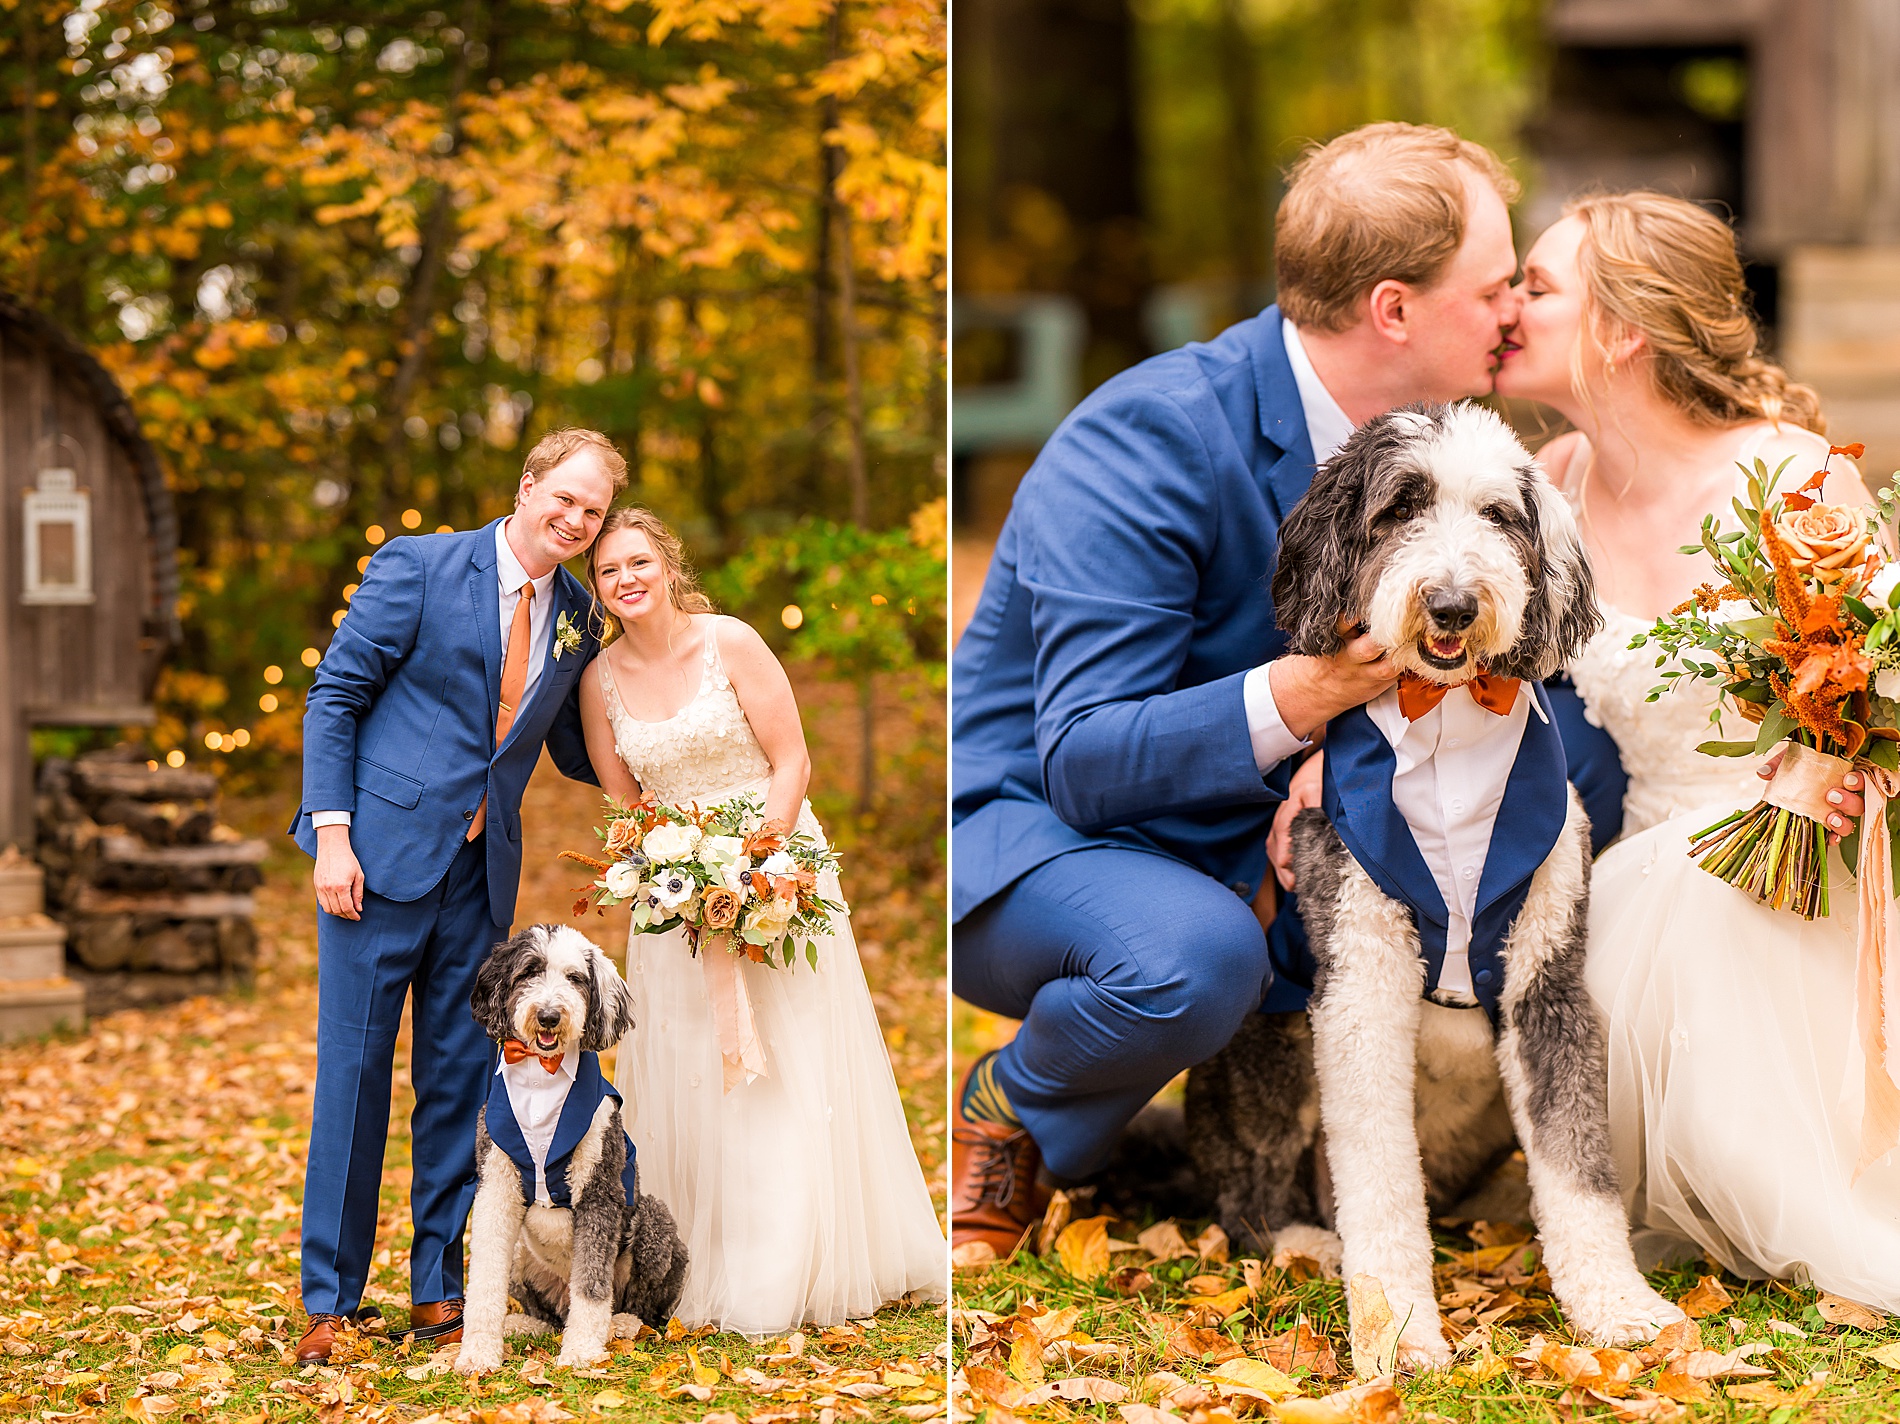 wedding portraits with dog in tux